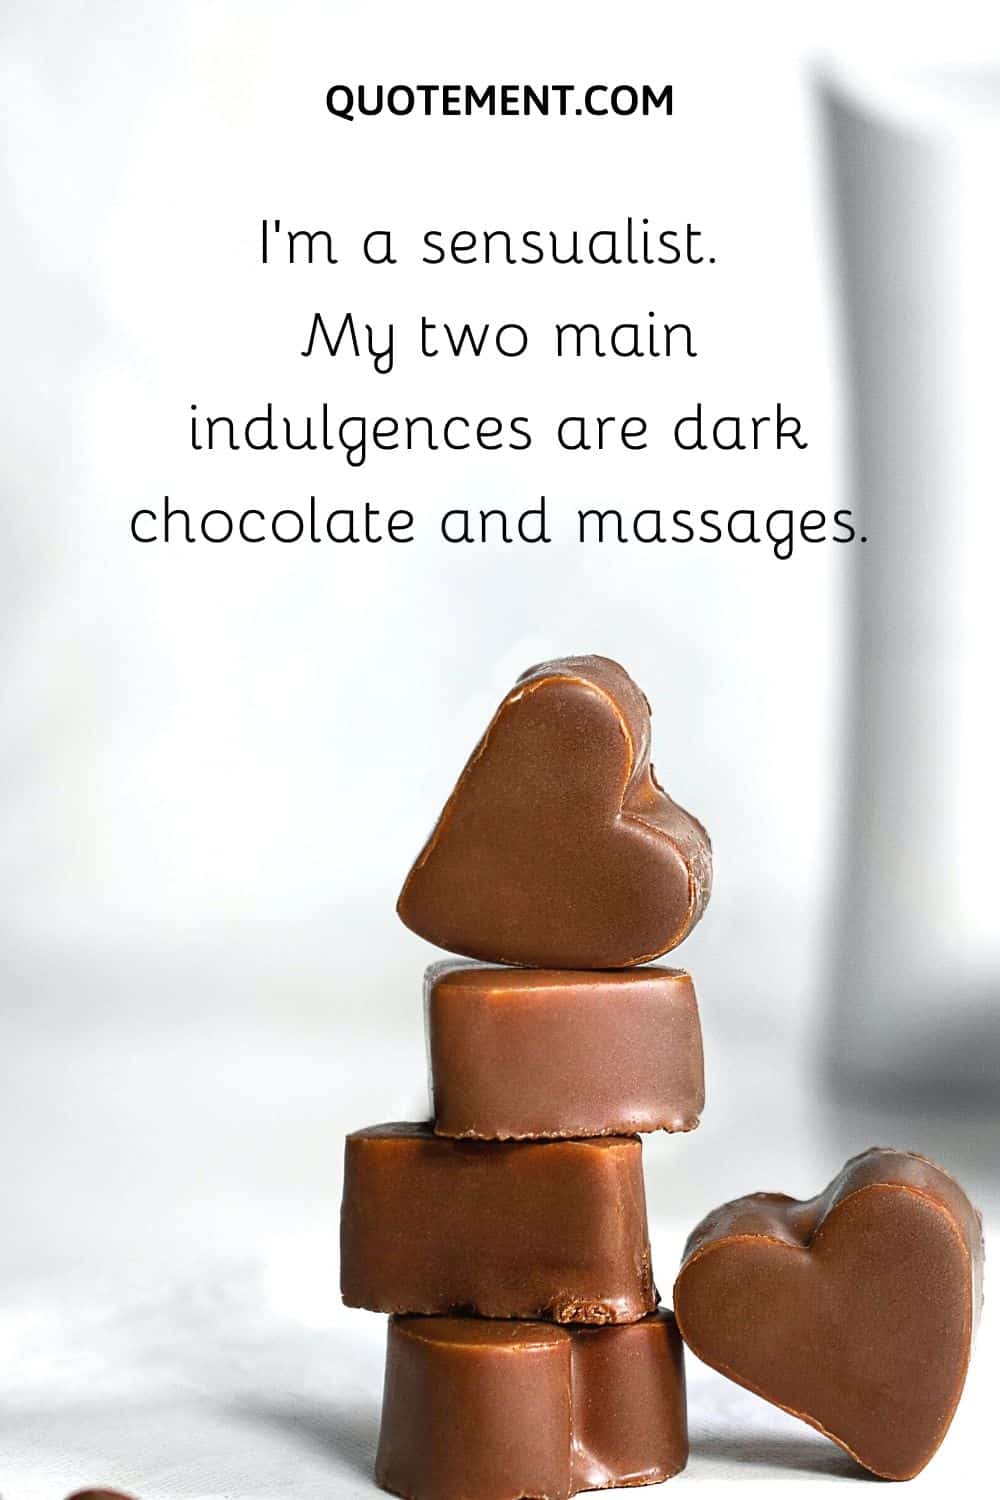 I’m a sensualist. My two main indulgences are dark chocolate and massages.